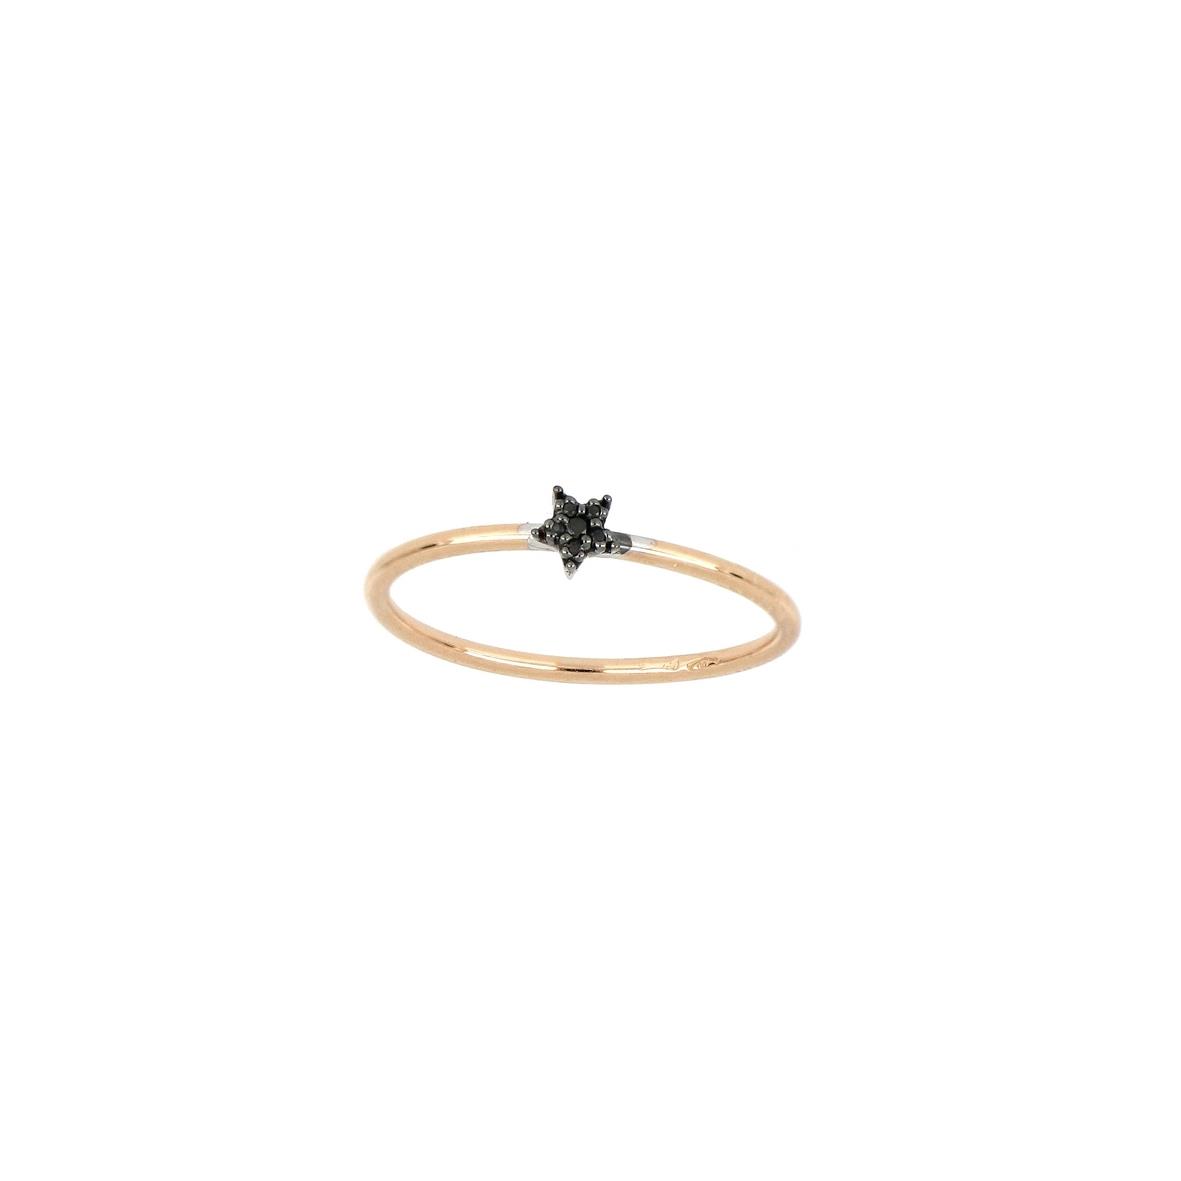 Ring in rose gold and white gold, black rhodium with black diamonds - GOLD ART